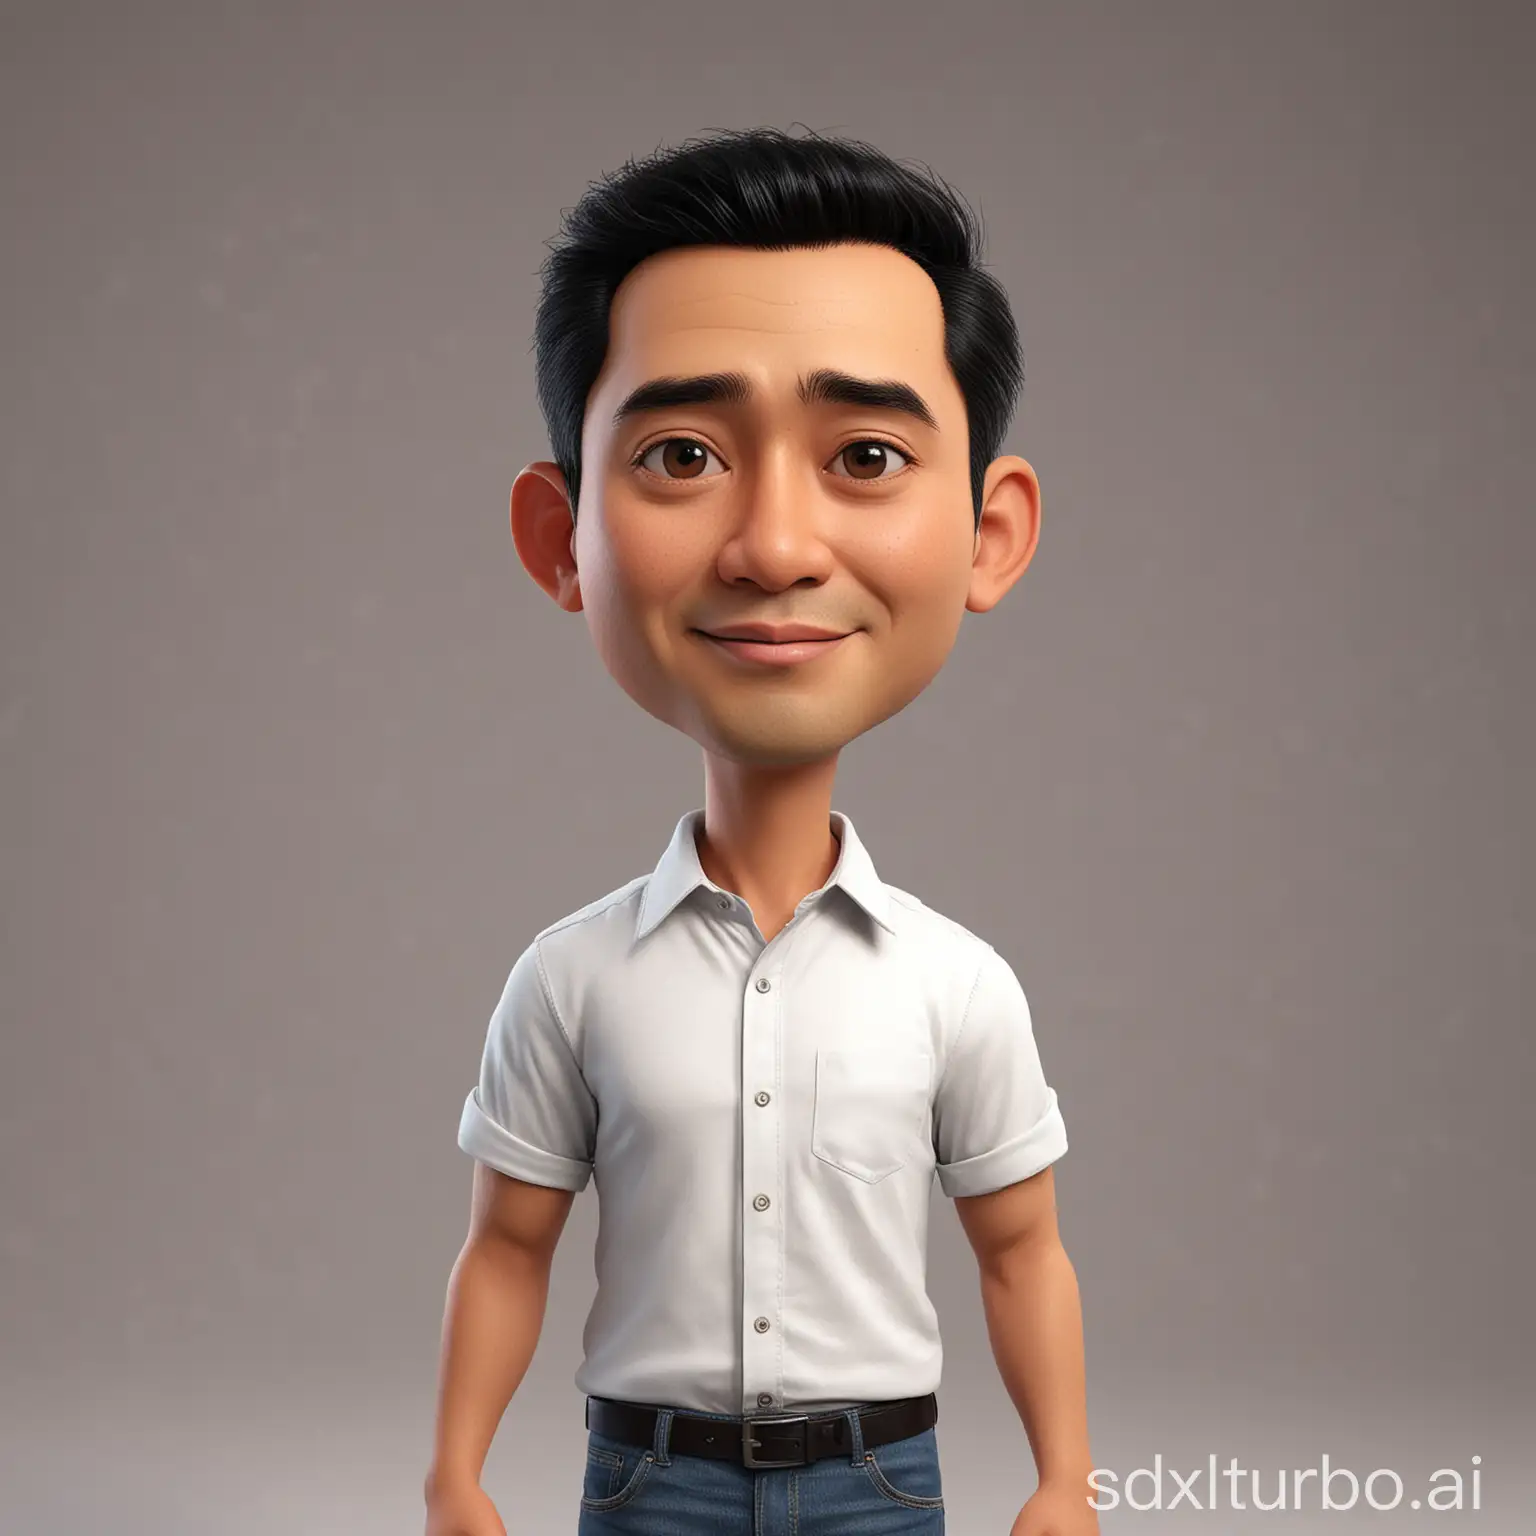 Create 3D cartoon style full body with a big head. A 50 year old Indonesian man. Tall, slightly thin body, oval face shape. Oval chin, handsome, slightly round eyes, clean white skin, faint smile. Black hair with a side part. Wearing a white shirt. Body position is clearly visible. Background colored peach solid. Use soft photography lighting, hair lighting, top lighting, side lighting. Highest quality photos, Uhd,16k.